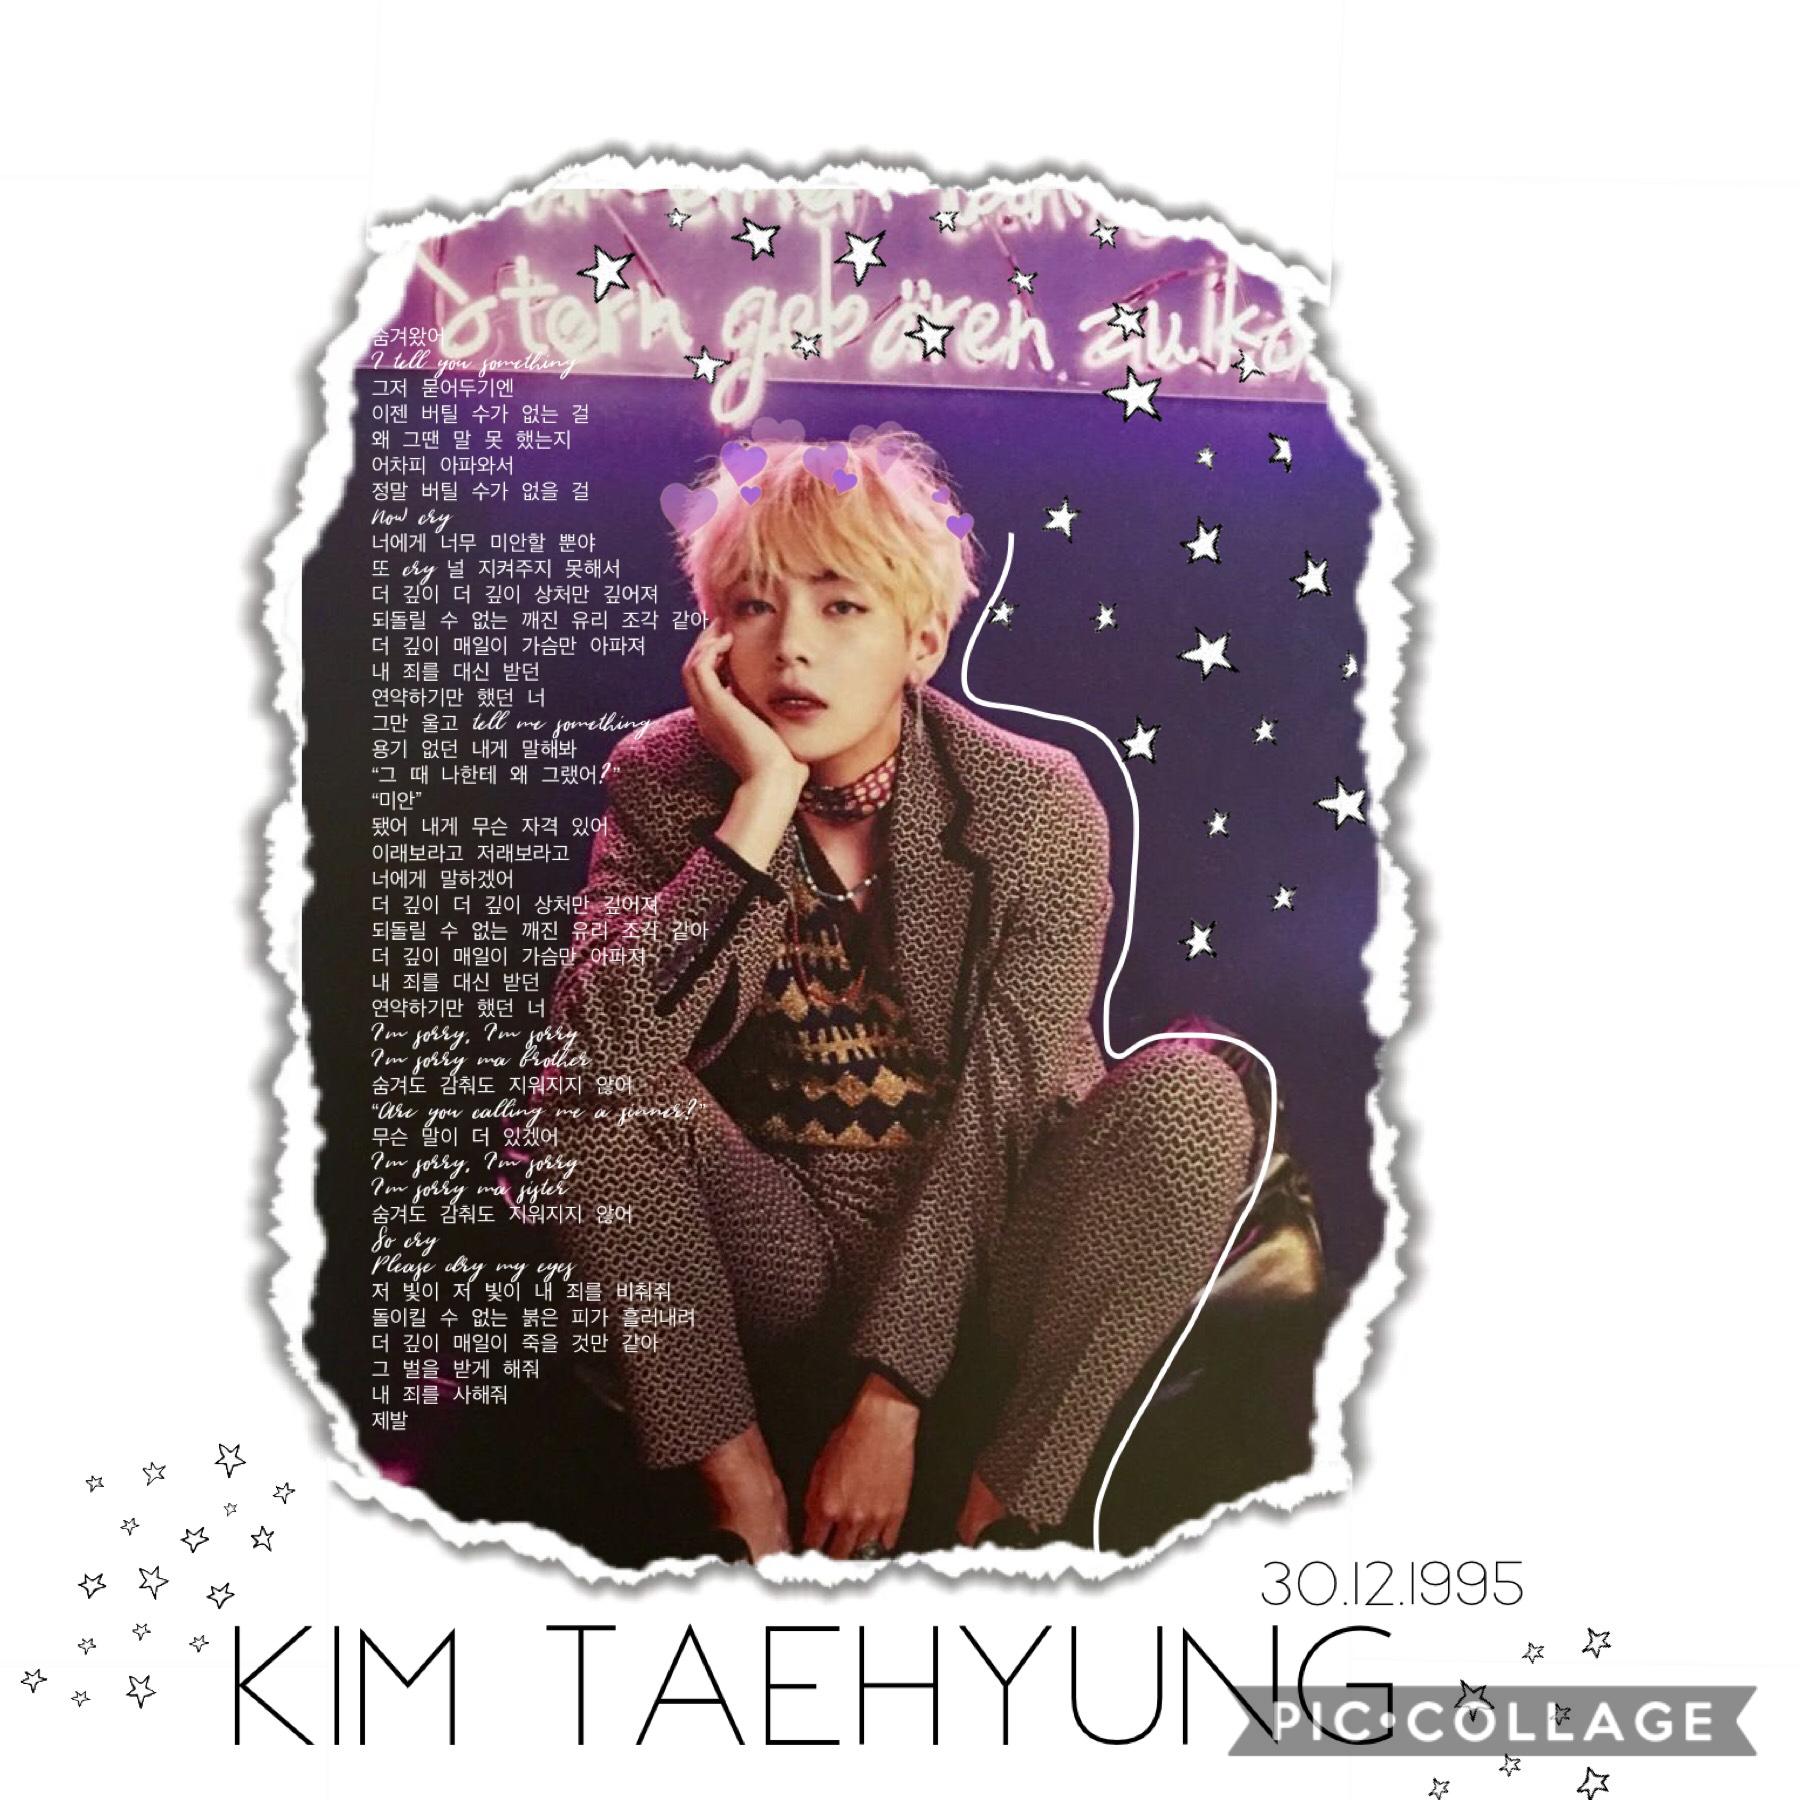 happy birthday taetae♡
The most handsome man in the world, it is a fact I am just telling the truth
We wish you a happy birthday and health, success for another year☆
Also, do you like this new style?